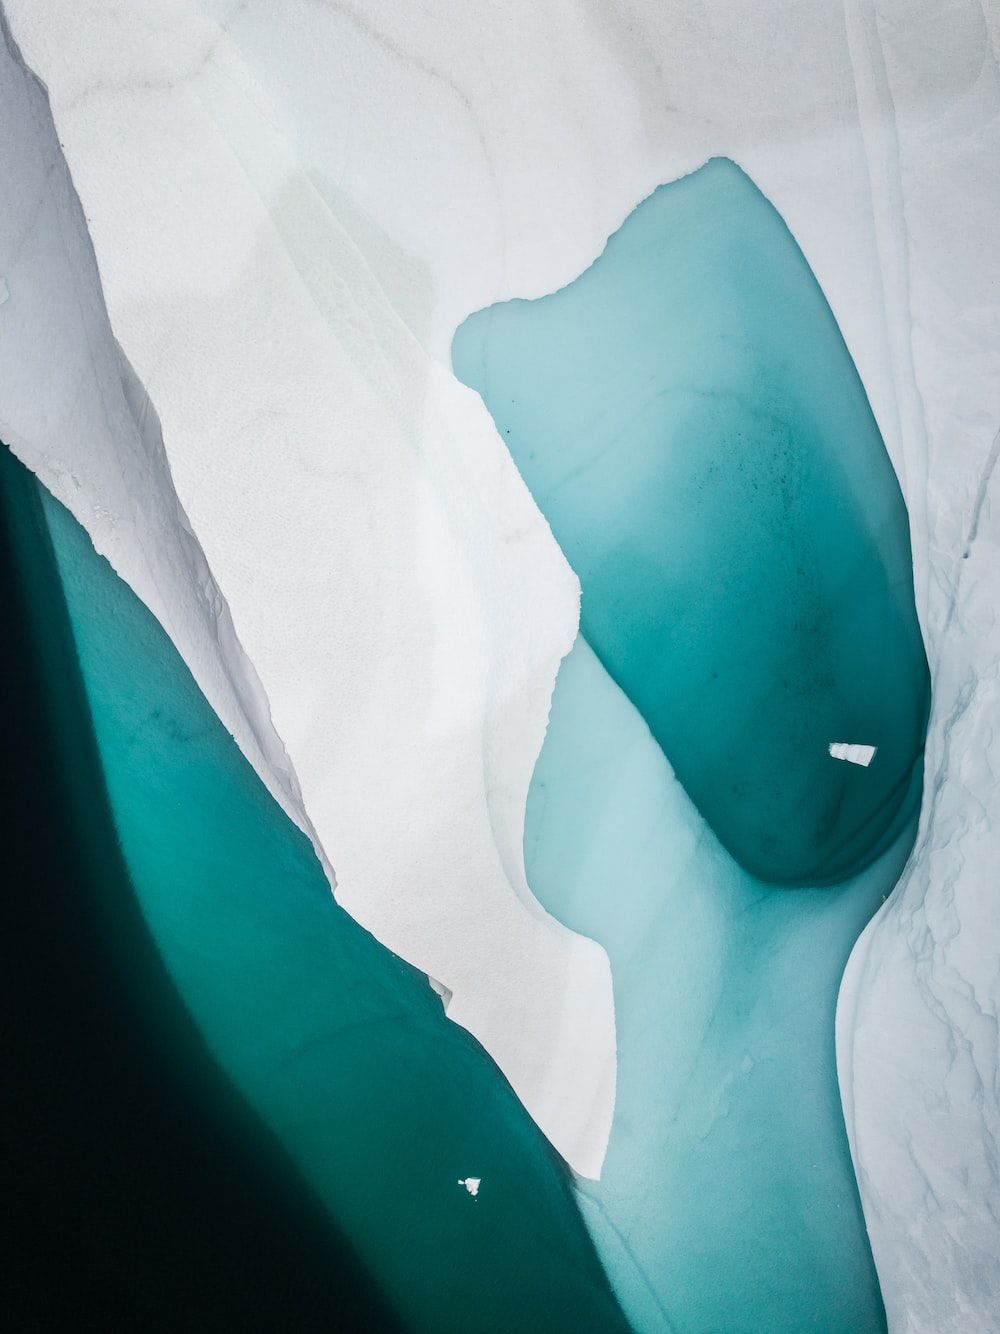 A white and blue ice formation in the Arctic - Cyan, turquoise, teal